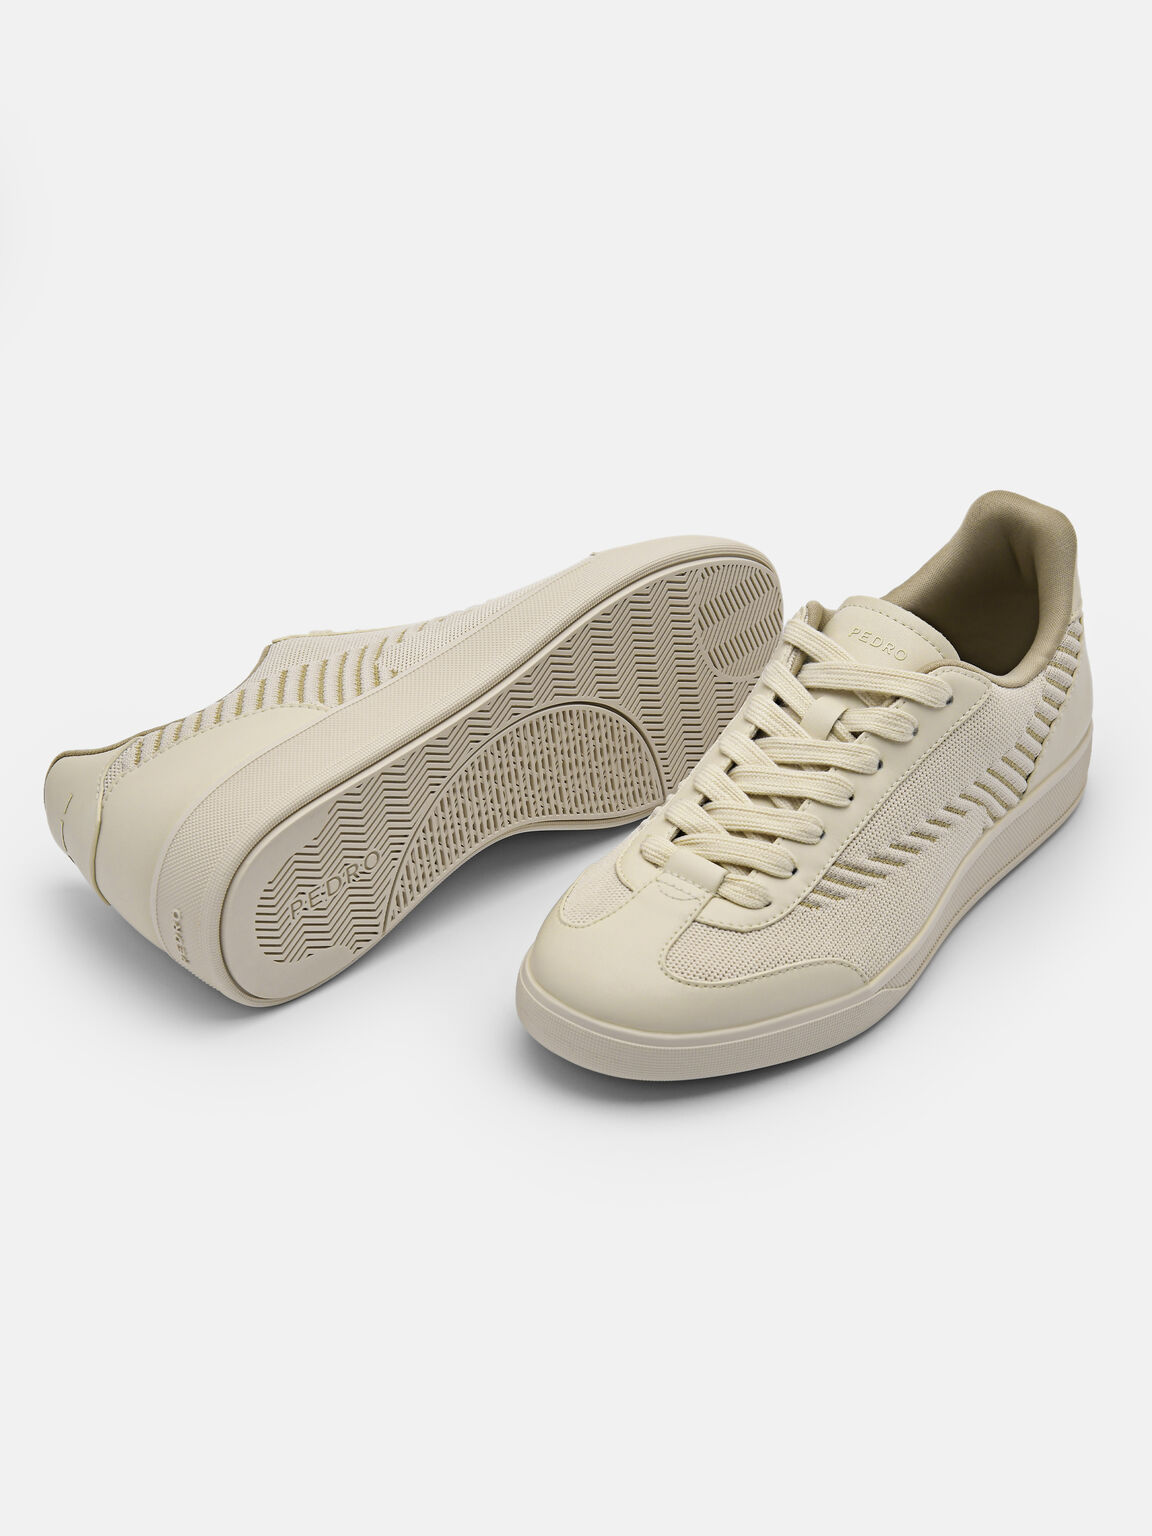 Giày sneakers cổ thấp Knitted, Cát